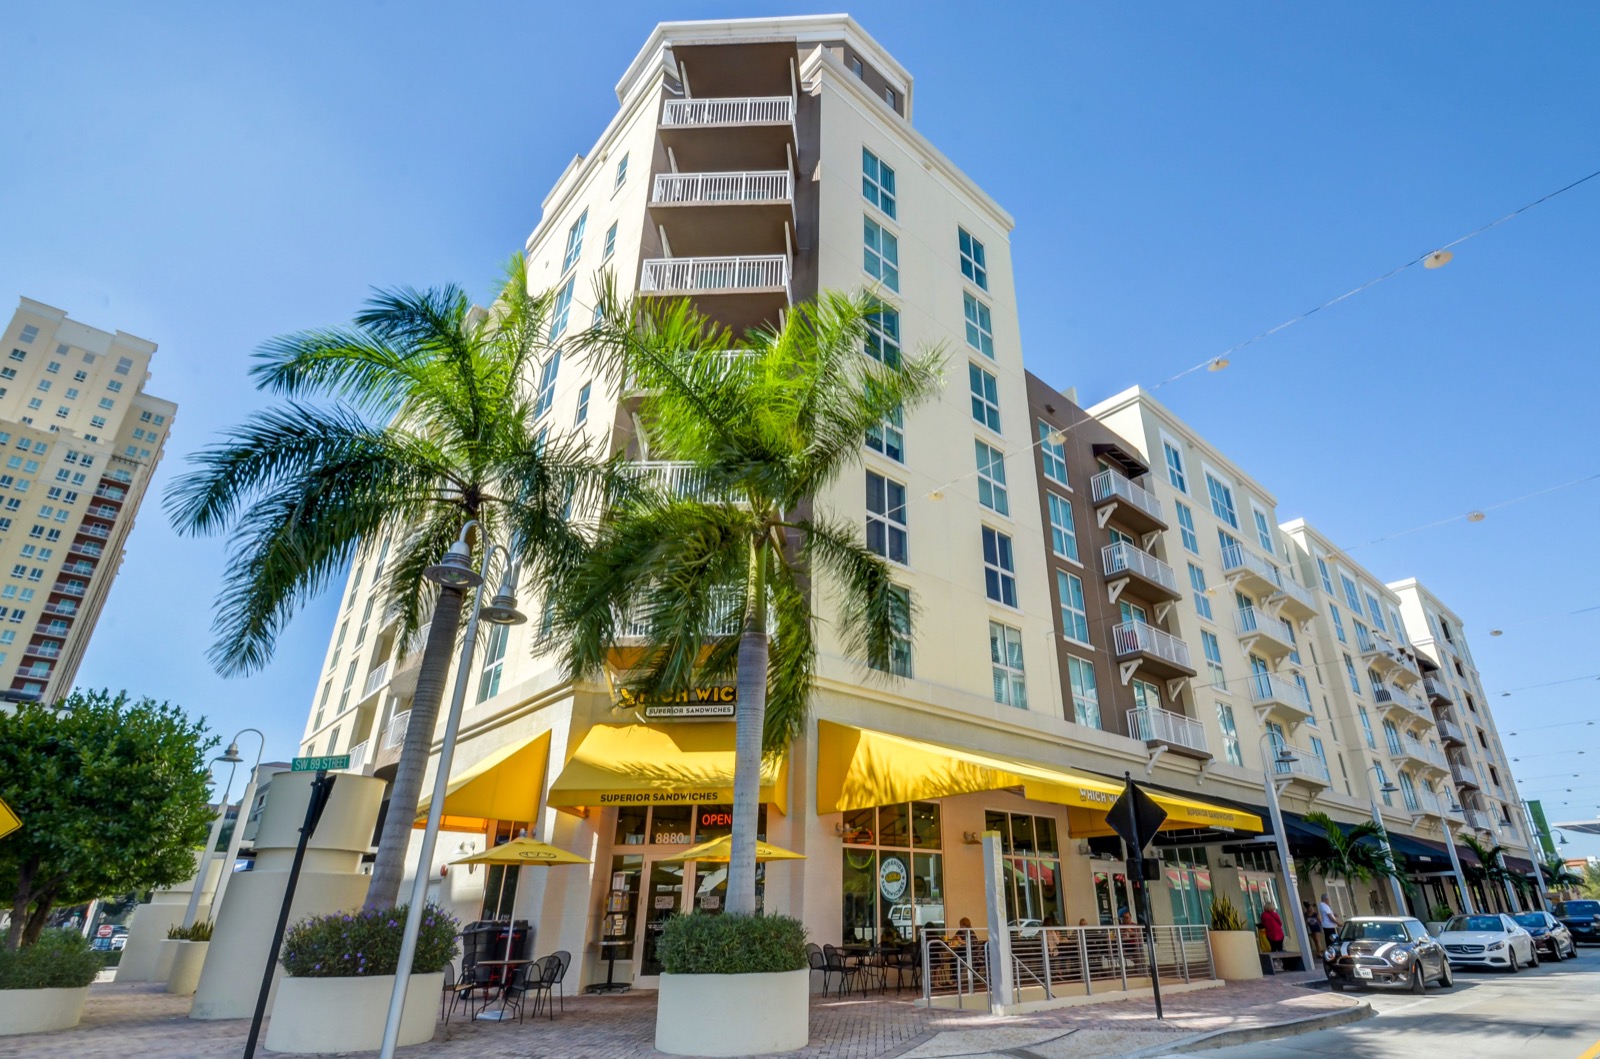 Dowtown Dadeland Apartments Building-A